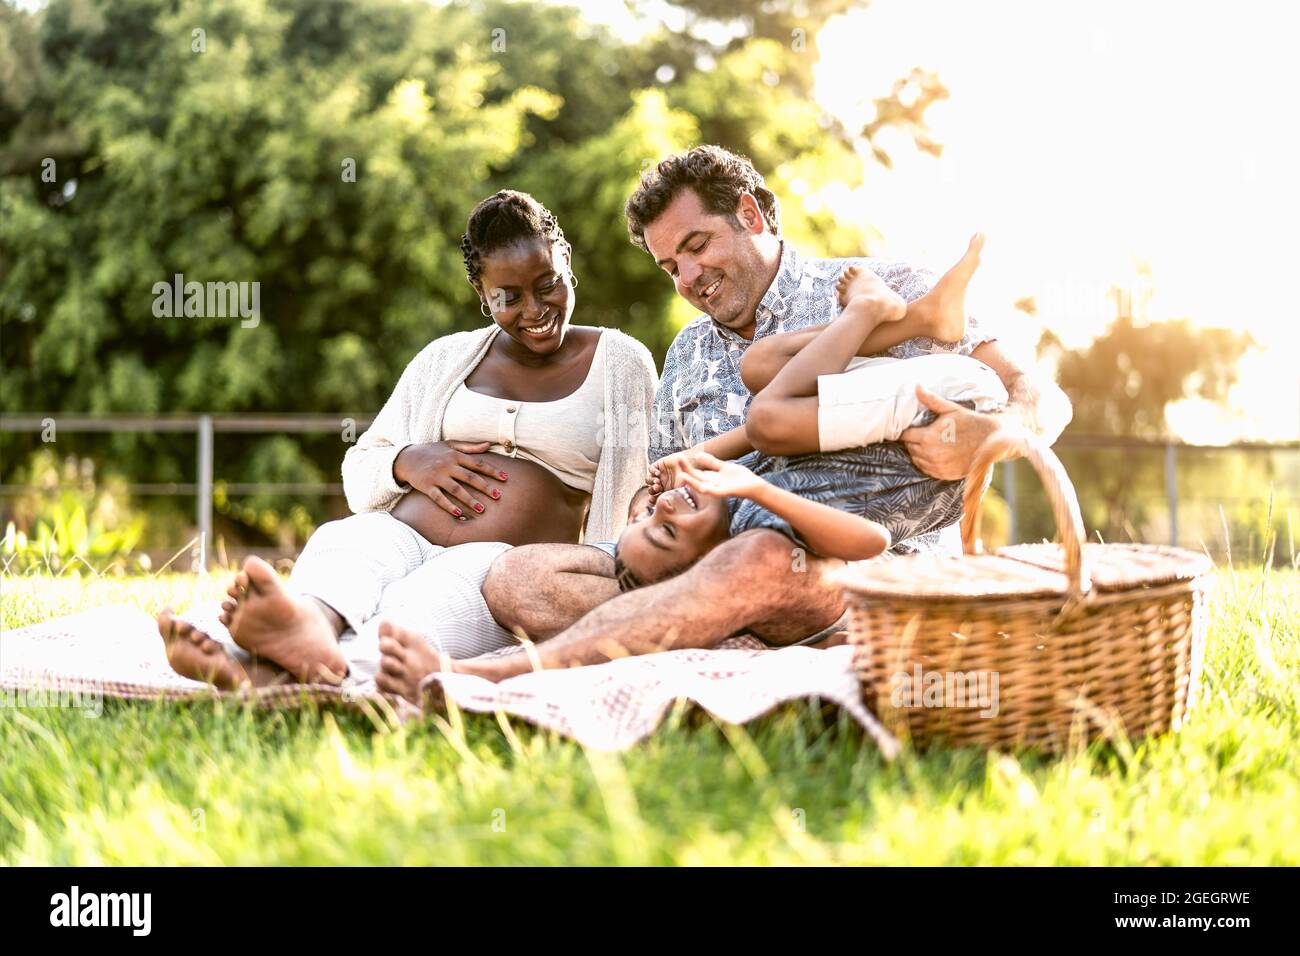 Happy playful multiracial family having fun in park doing a picnic together - Parents love concept Stock Photo